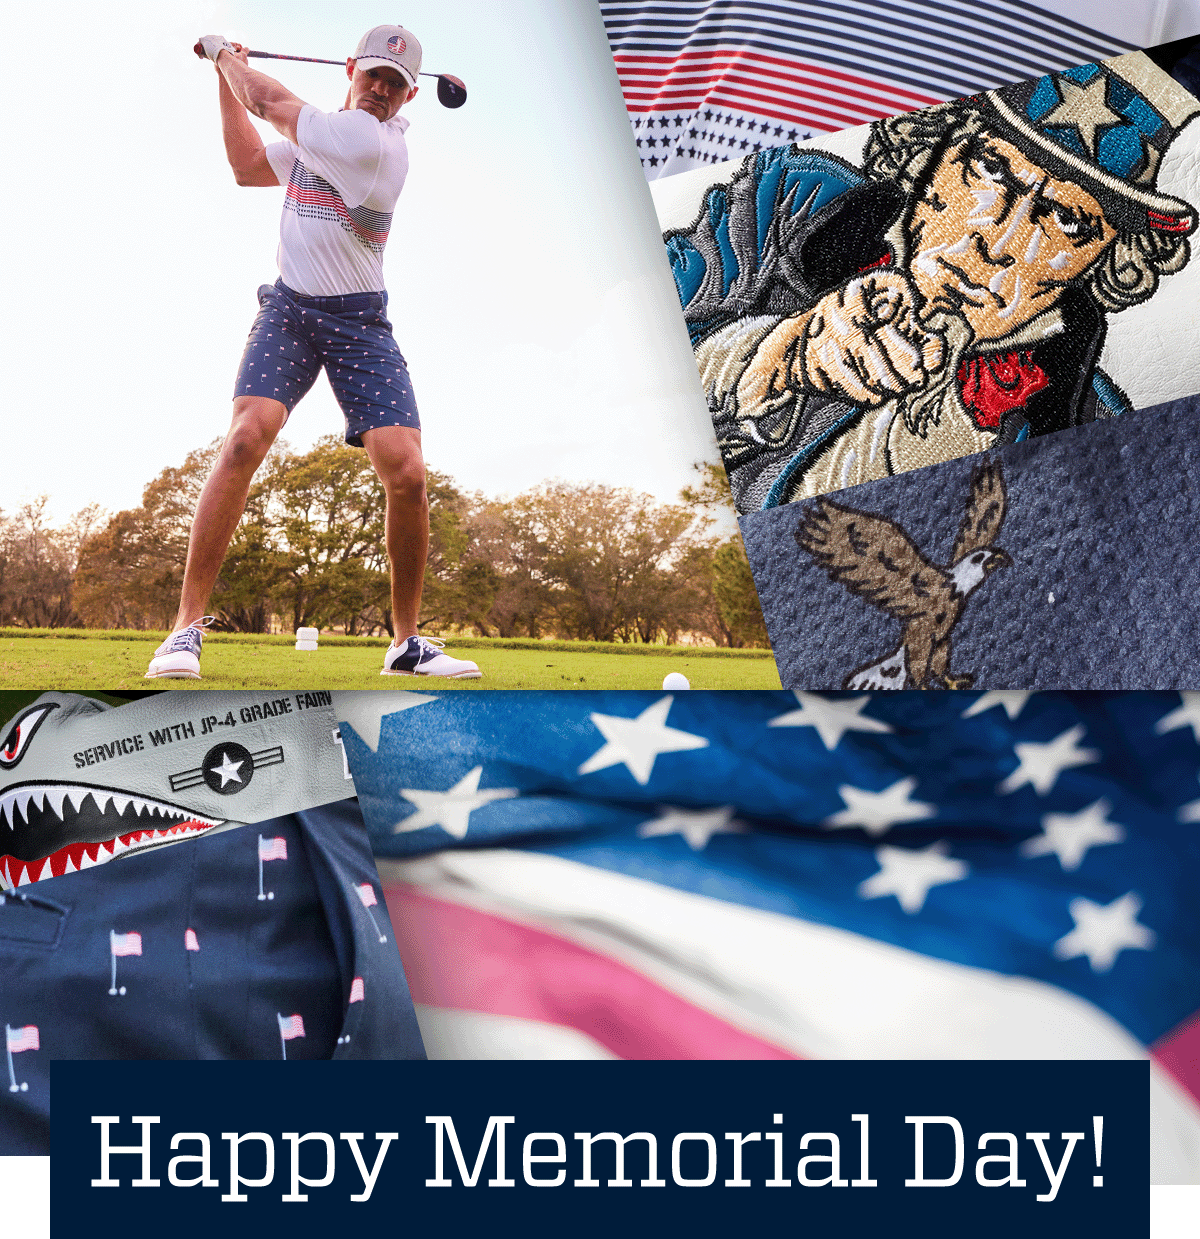 Happy Memorial Day! Represent the red, white and blue today - Golf